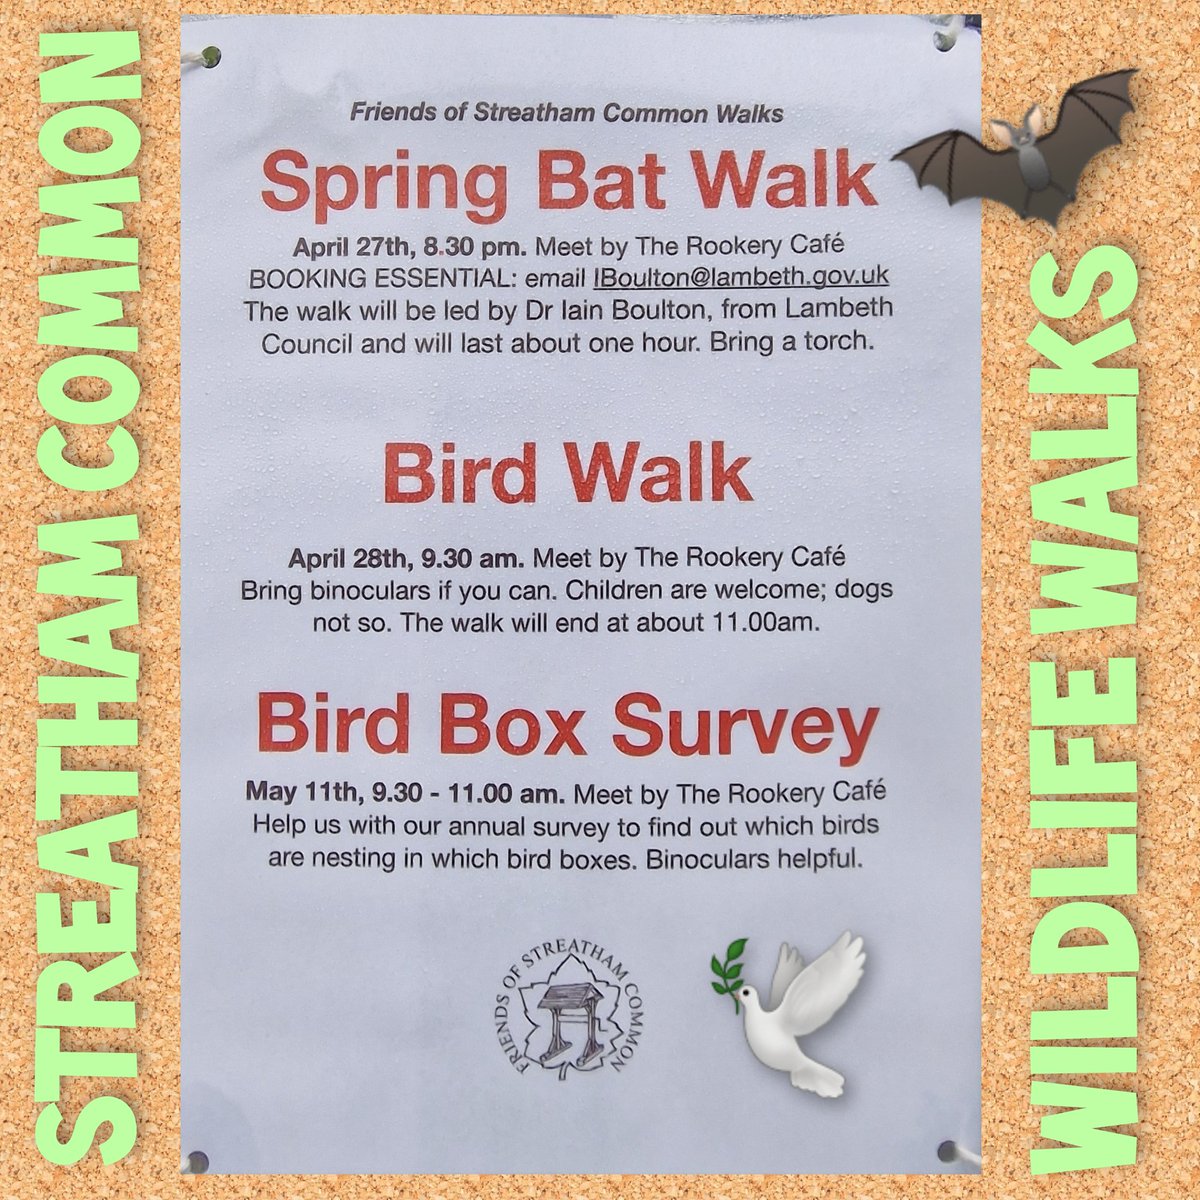 Our friends at the Friends of Streatham Common have some wonderful #wildlife Walks coming up 🦇🕊️🦉 Bat Walk pre book only No Dogs on Bird Walk